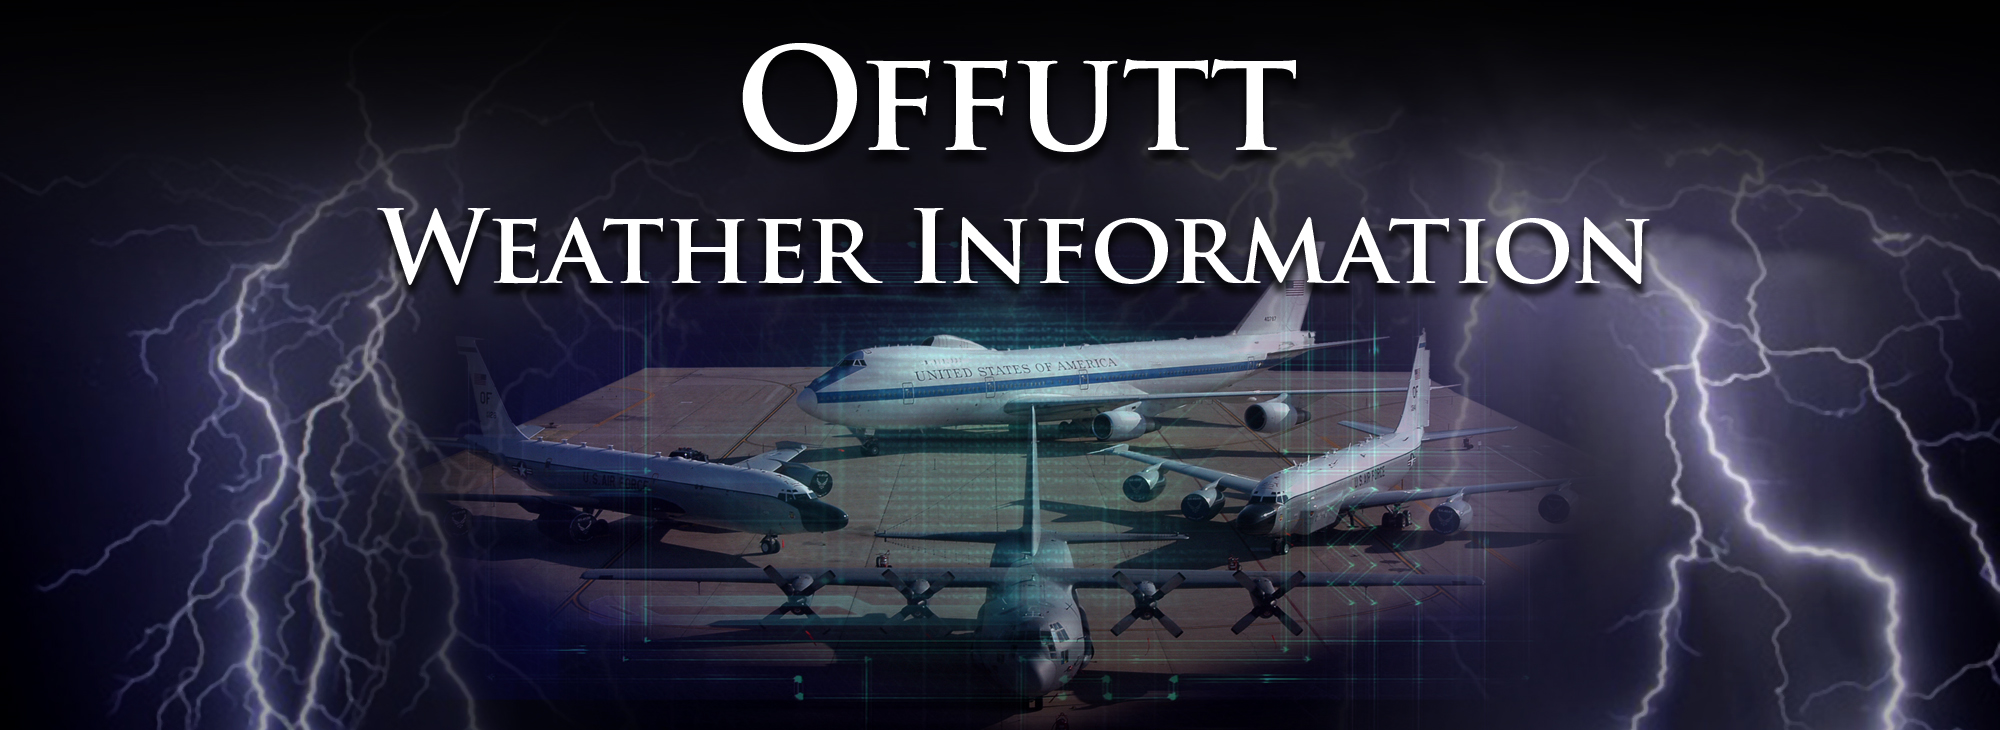 Offutt Weather: Graphic of Aircraft with lightning and clouds